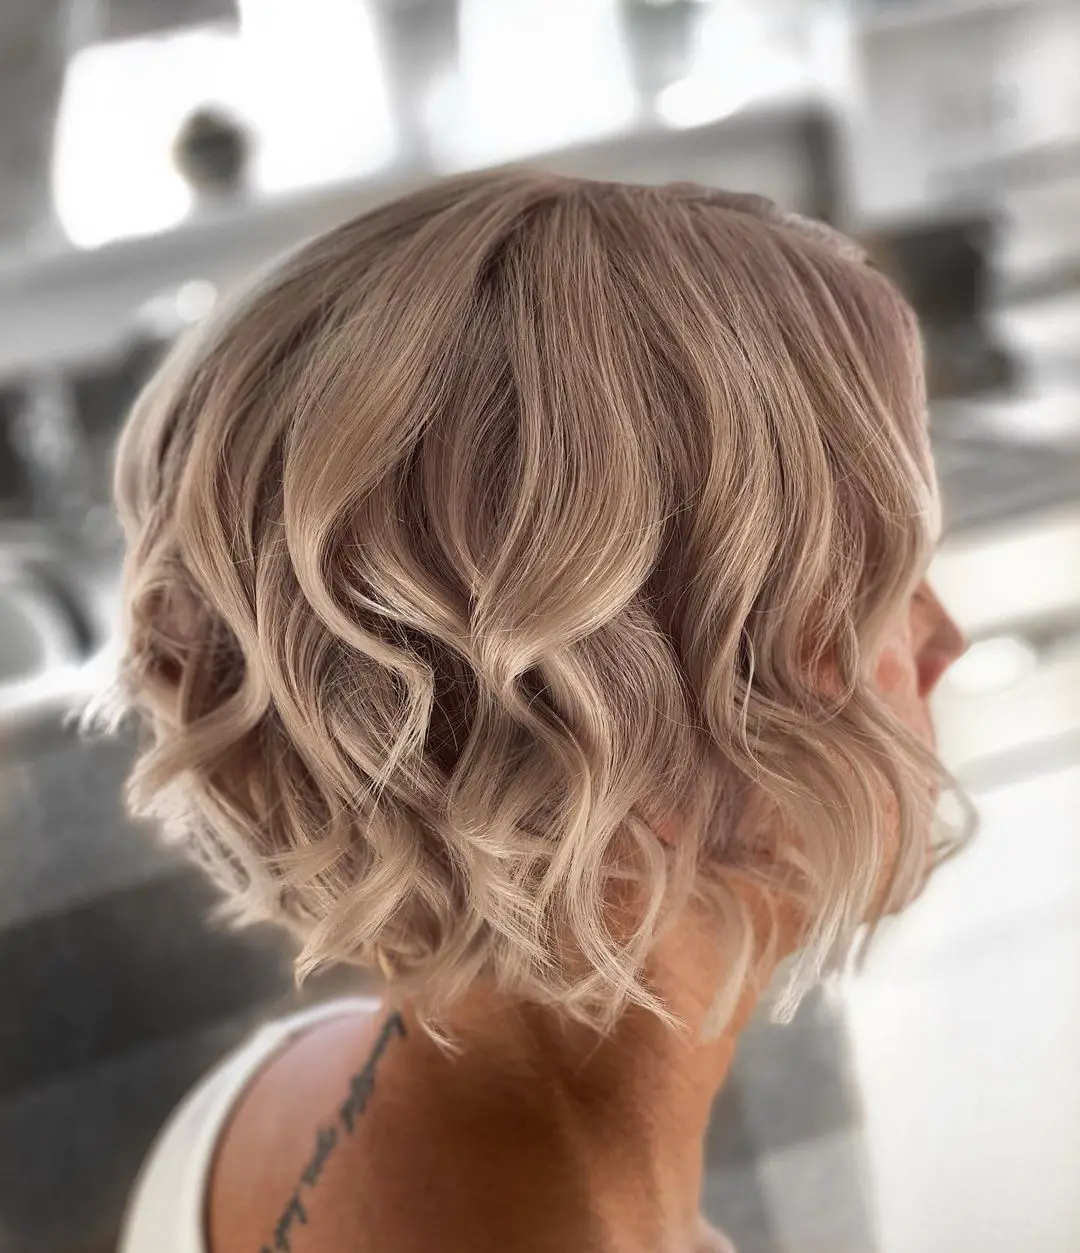 51-homecoming-prom-hairstyles-for-girls-with-short-hair Short Curly Bob